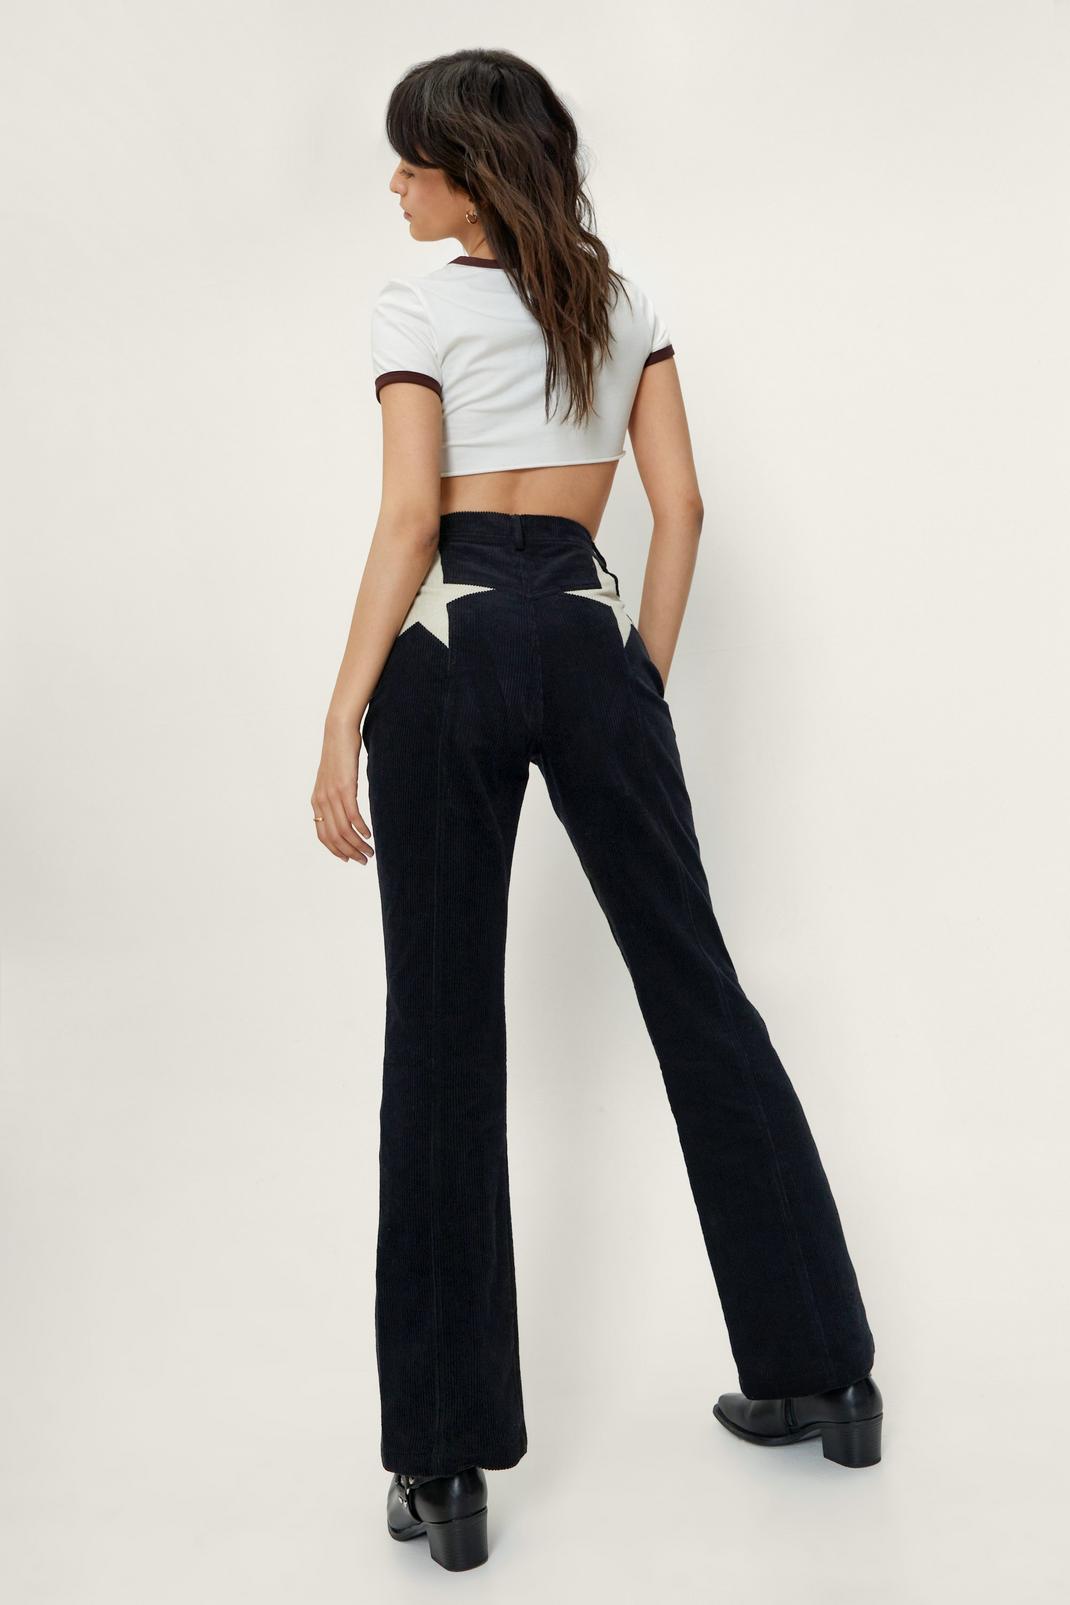 Black Corduroy High Waisted Flared Star Bum Pants image number 1